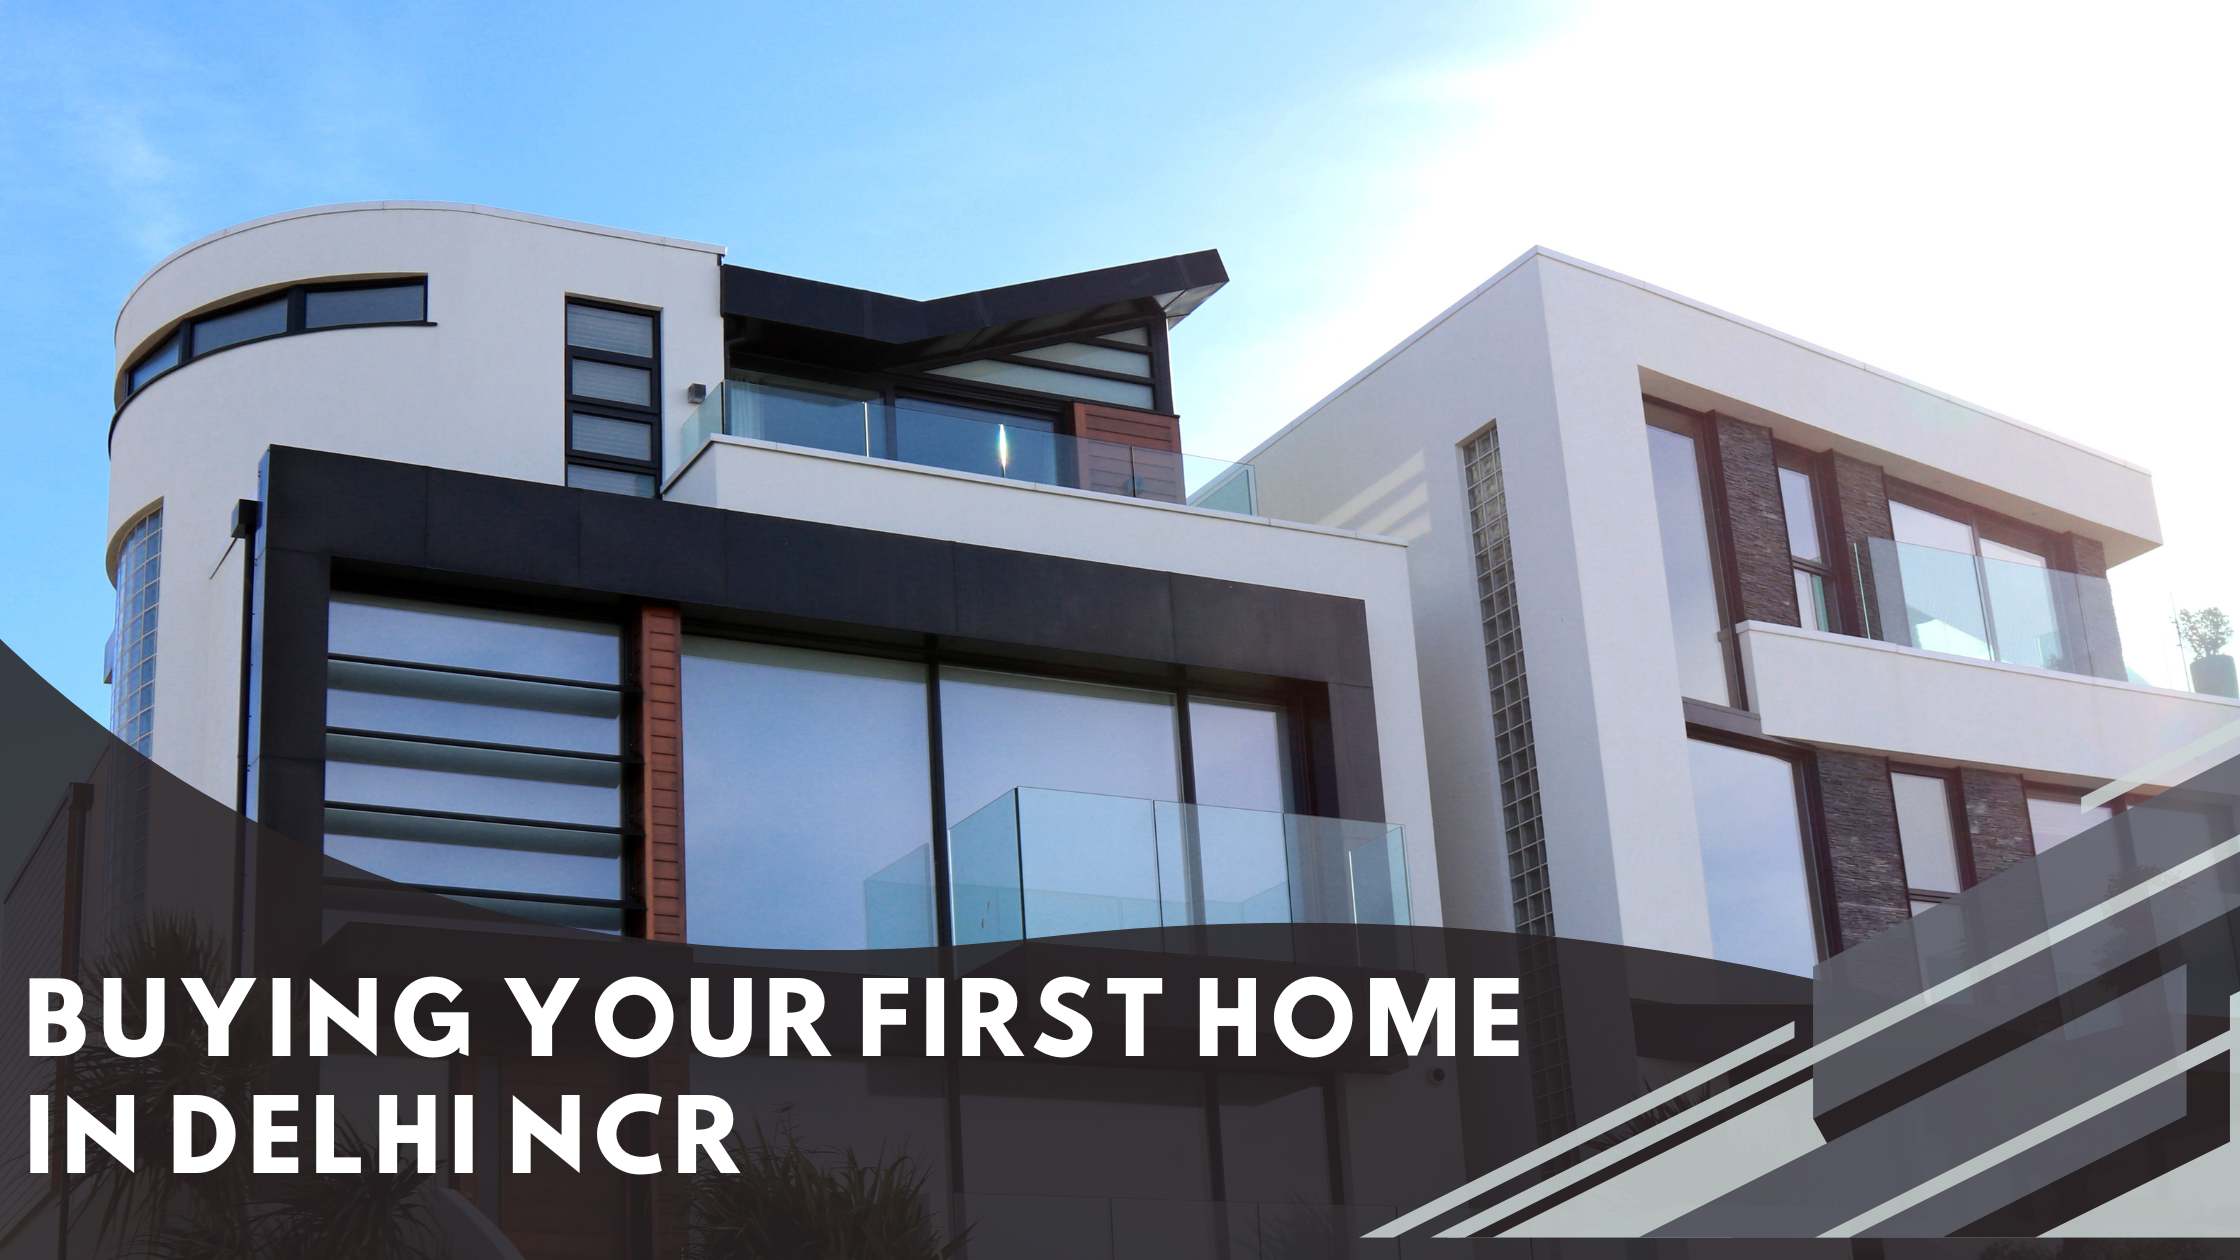 The Ultimate Guide to Buying Your First Home in Delhi NCR